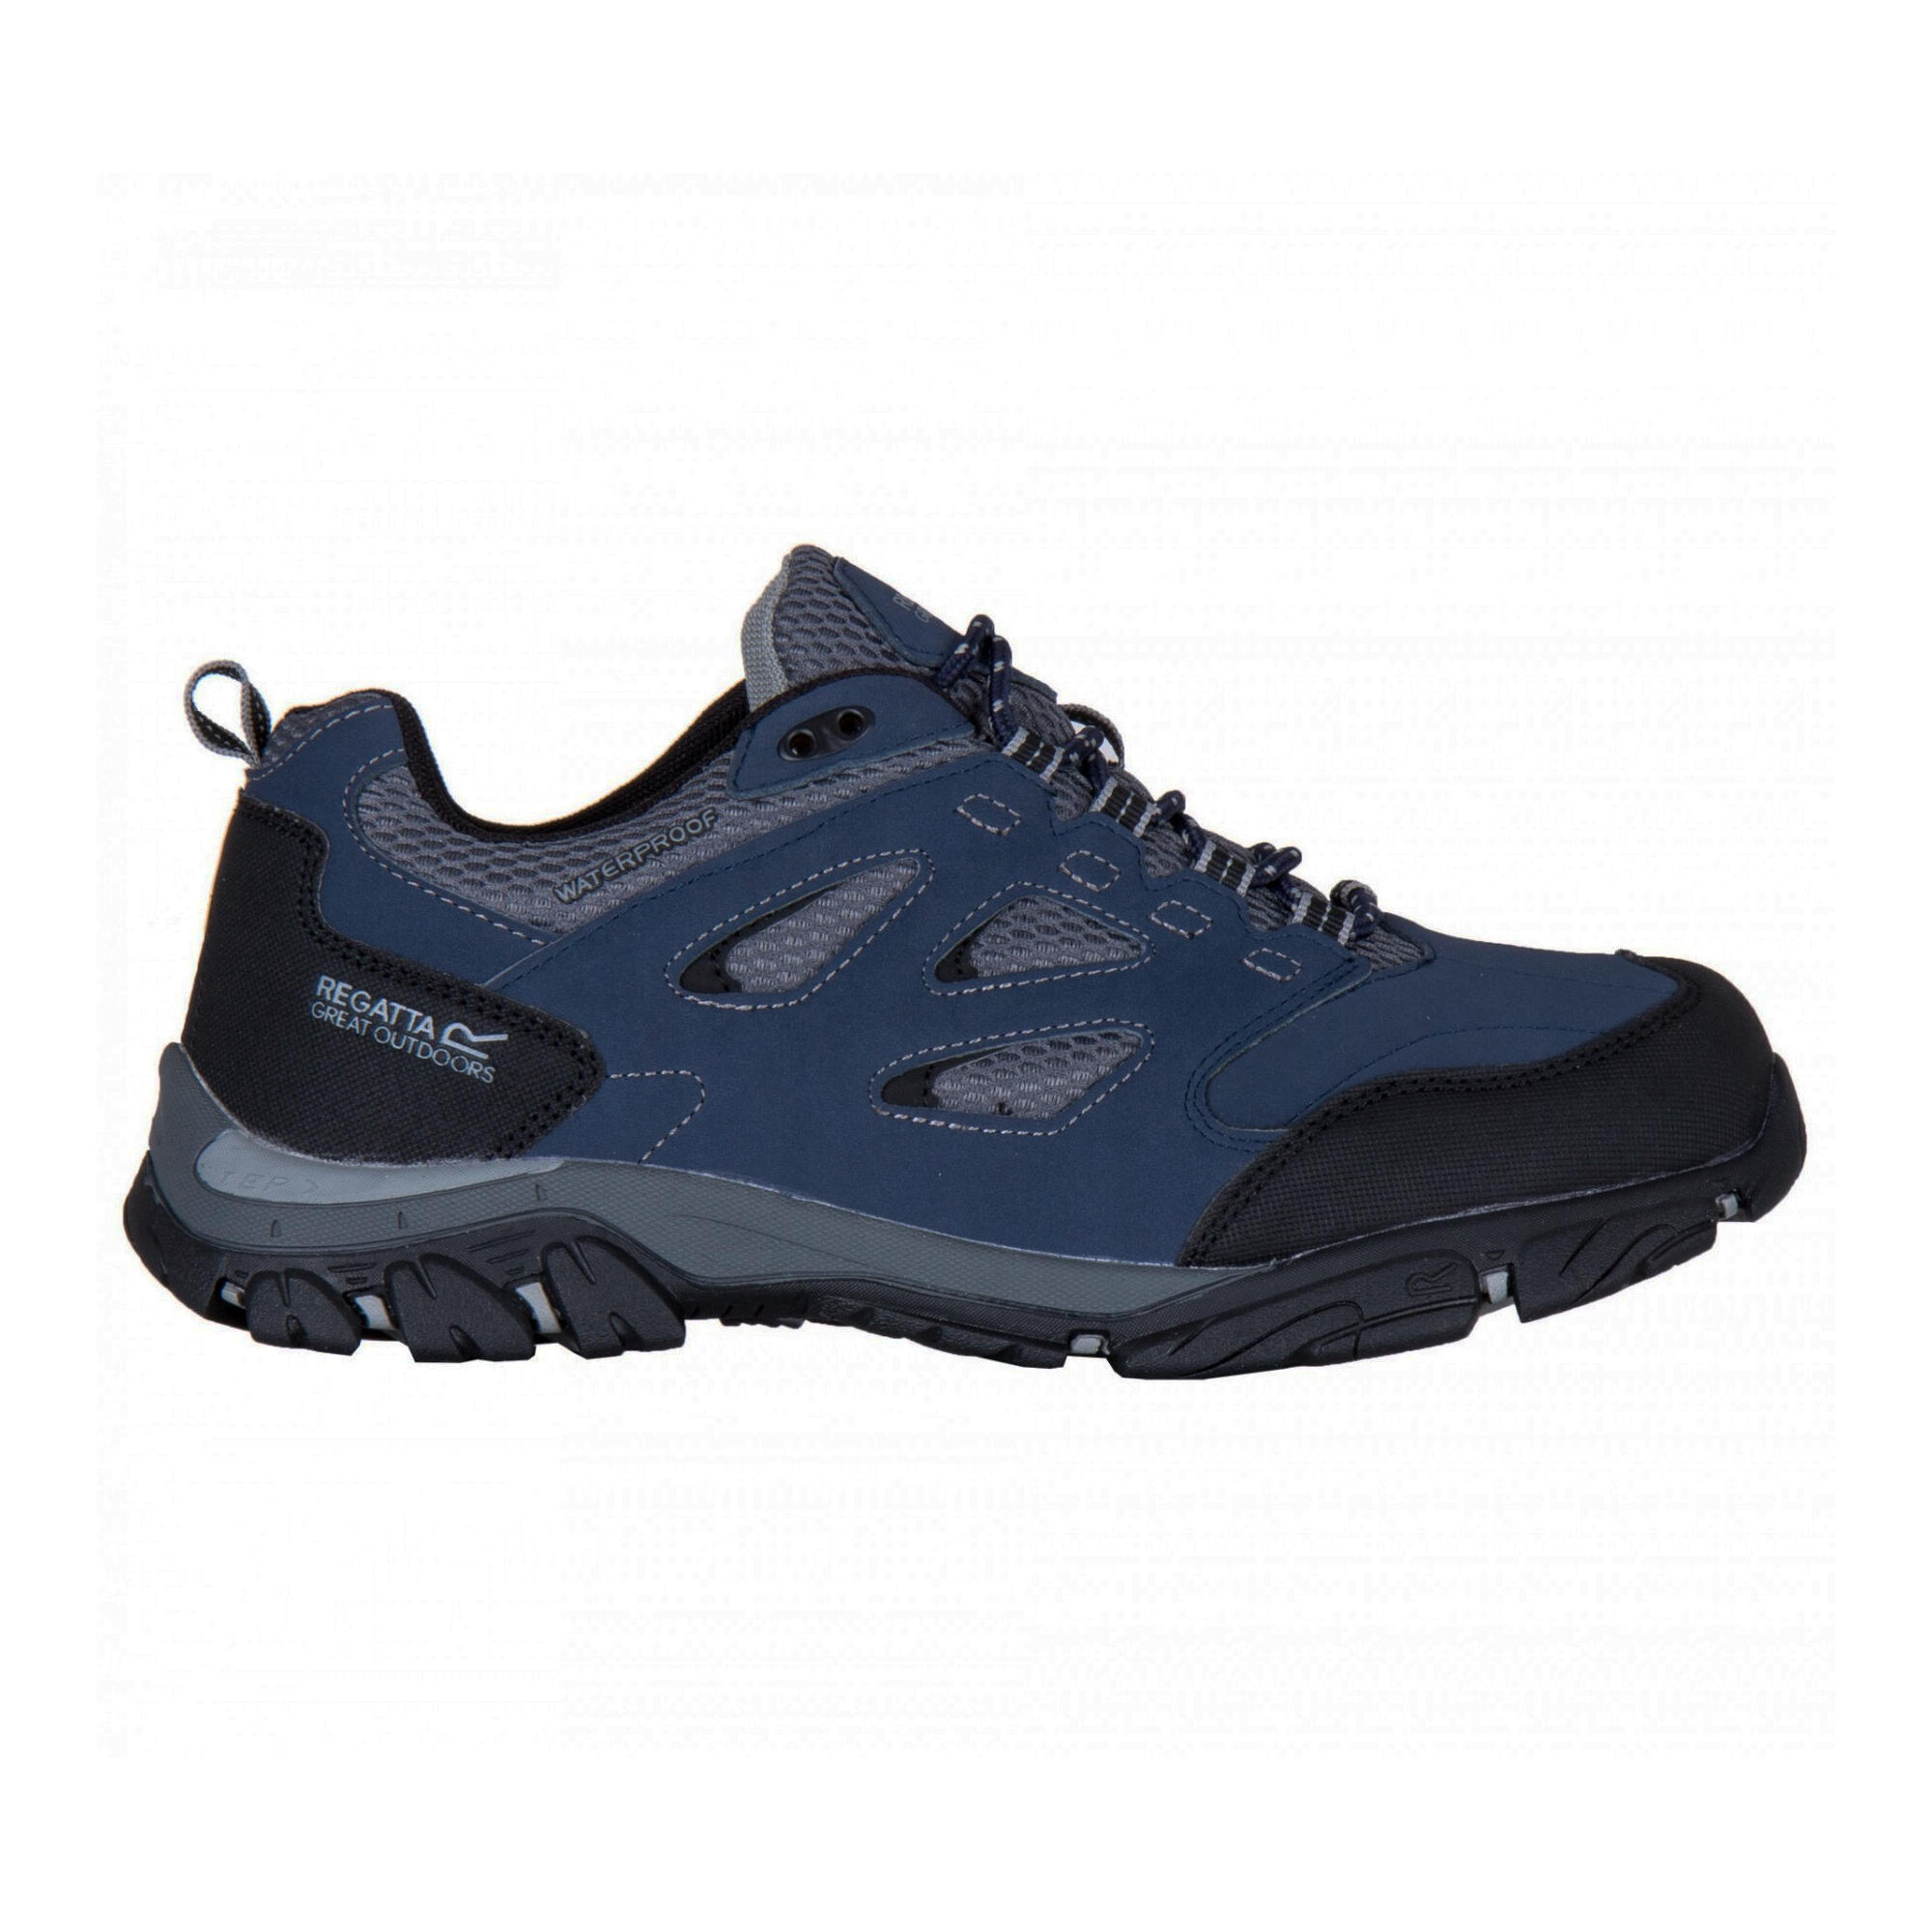 Mens Holcombe IEP Low Hiking Boots (Navy/Granite) 3/5